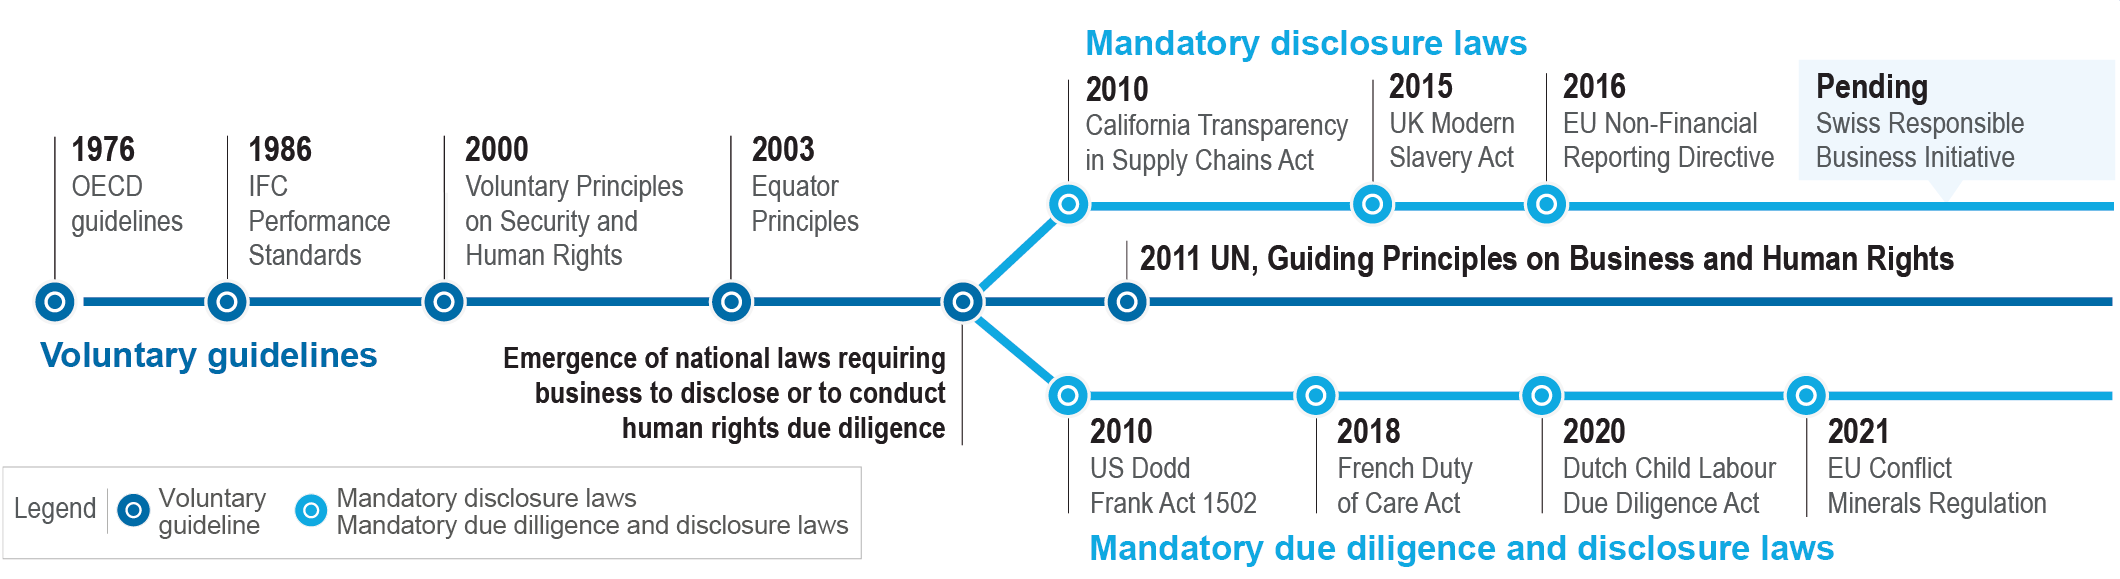 Emerging national law on human rights due diligence_HRO 2017 mandatory supply chain reporting